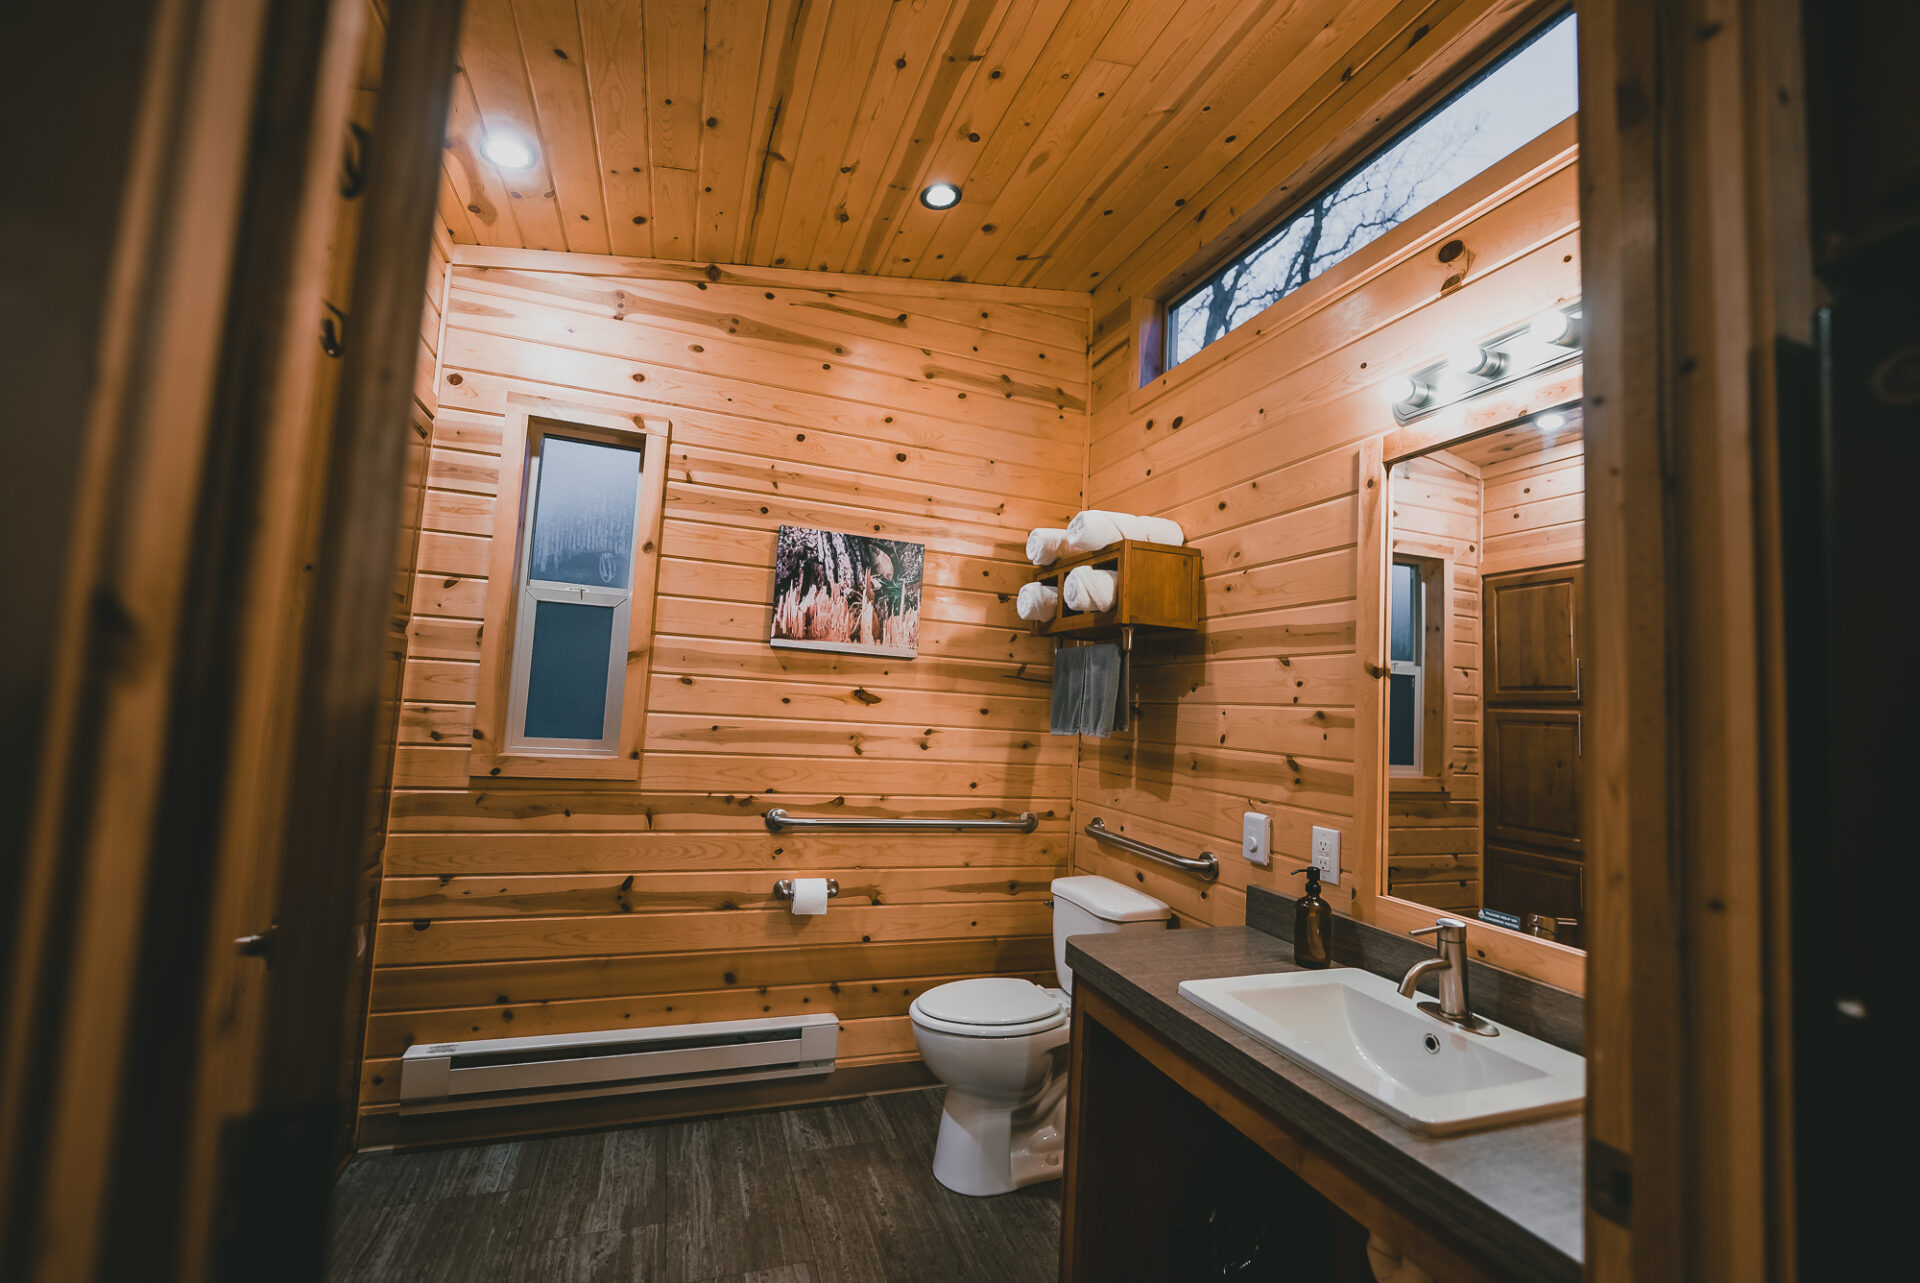 Inside our cabin at Sierra Meadows Glamping Resort